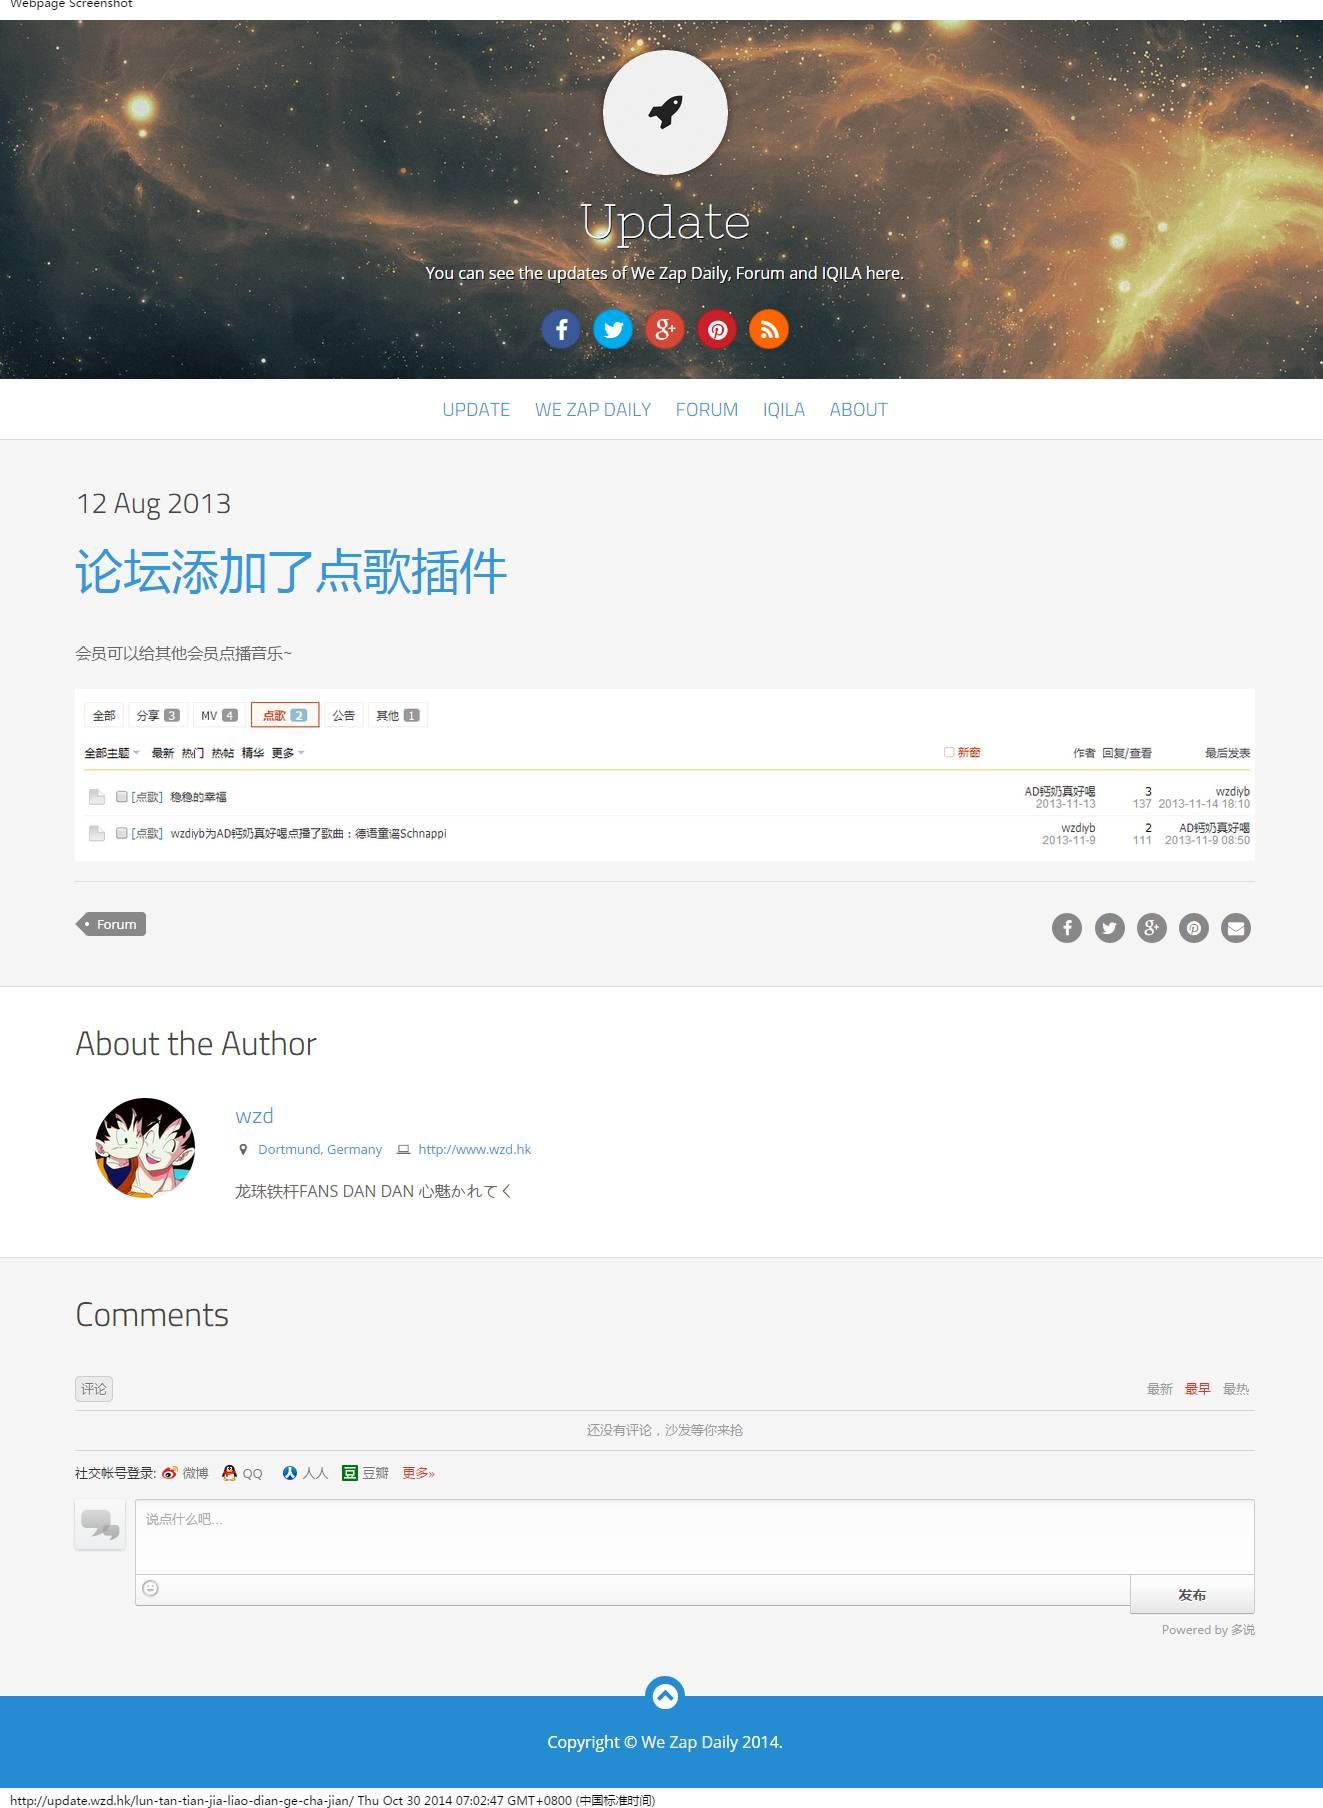 The Screenshot of Post page